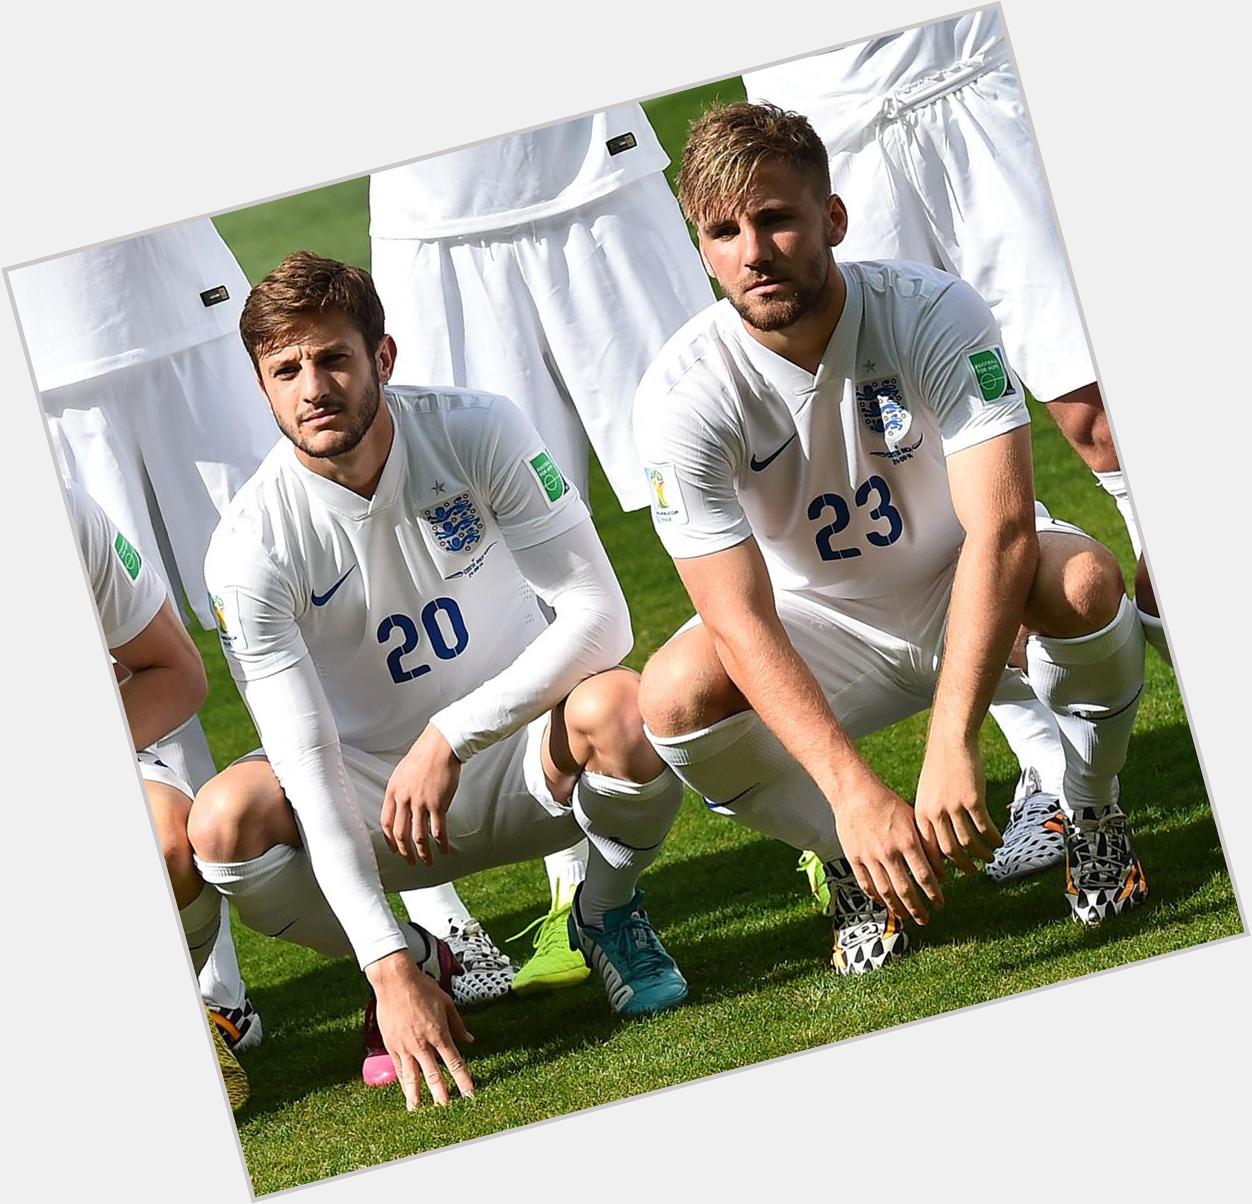 Happy Birthday Adam Lallana. Hope you can play better and win world cup  ... 